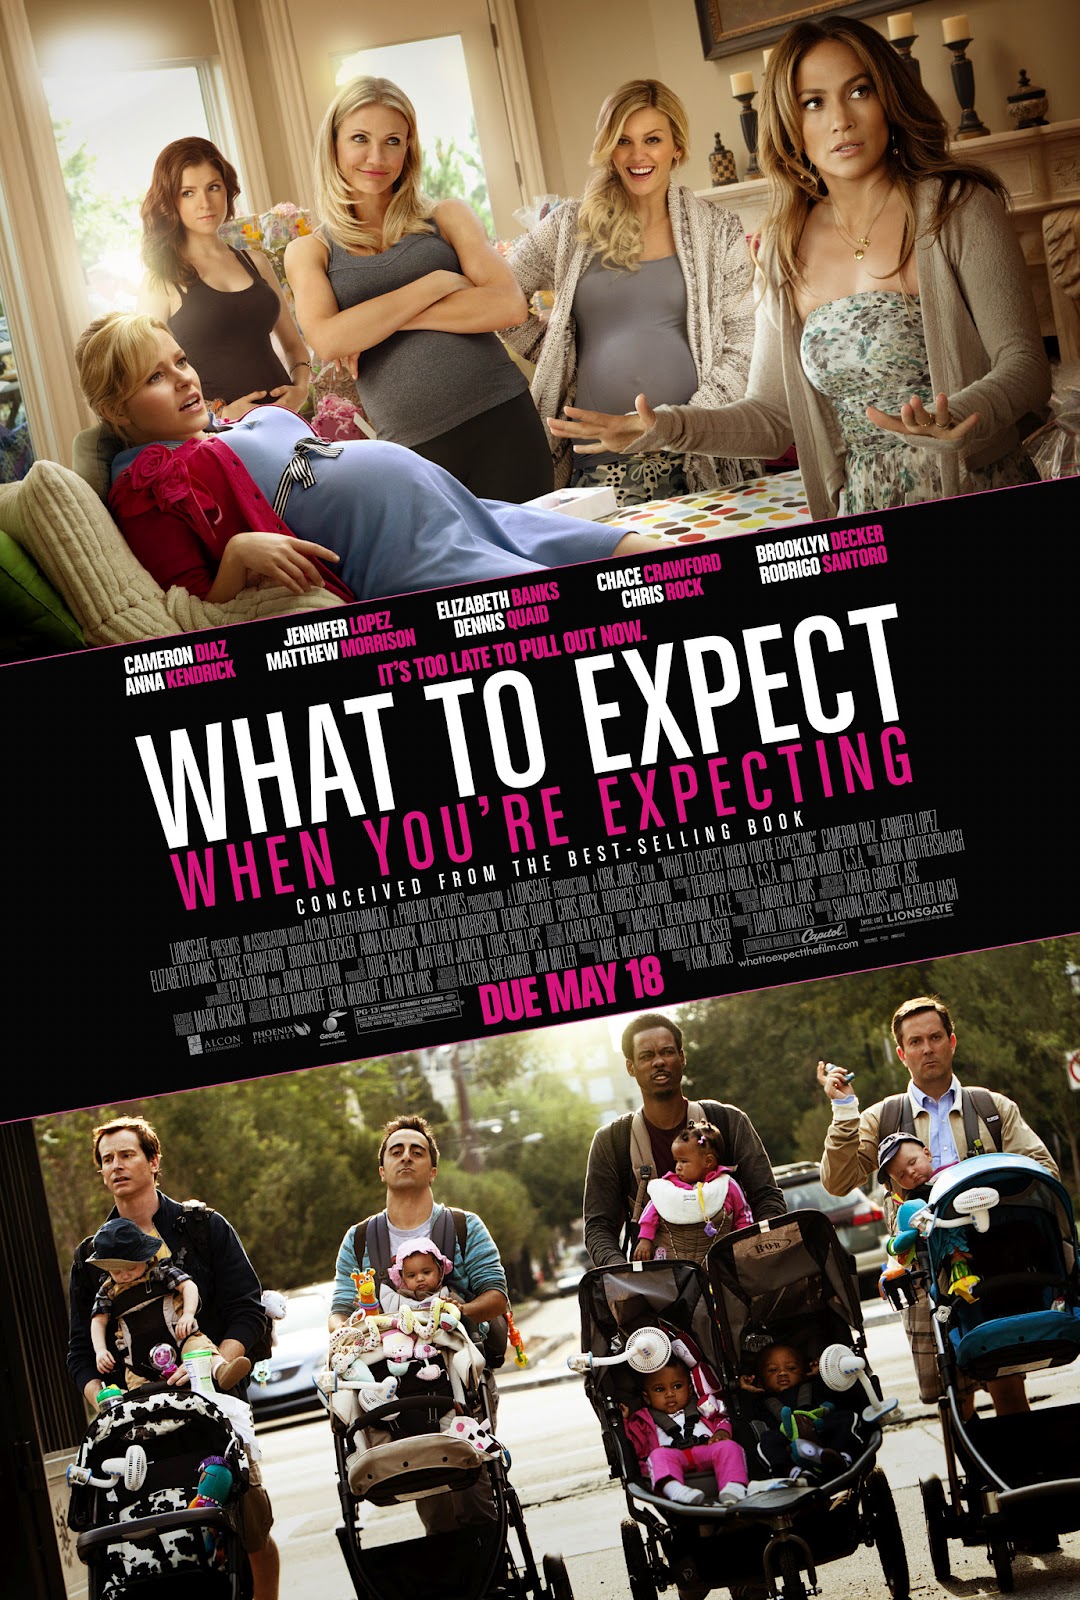 http://1.bp.blogspot.com/-1czxSOcP9cA/T9O2a-31alI/AAAAAAAABvU/bmUDpuA8HjA/s1600/What-To-Expect-When-You-re-Expecting-poster.jpg